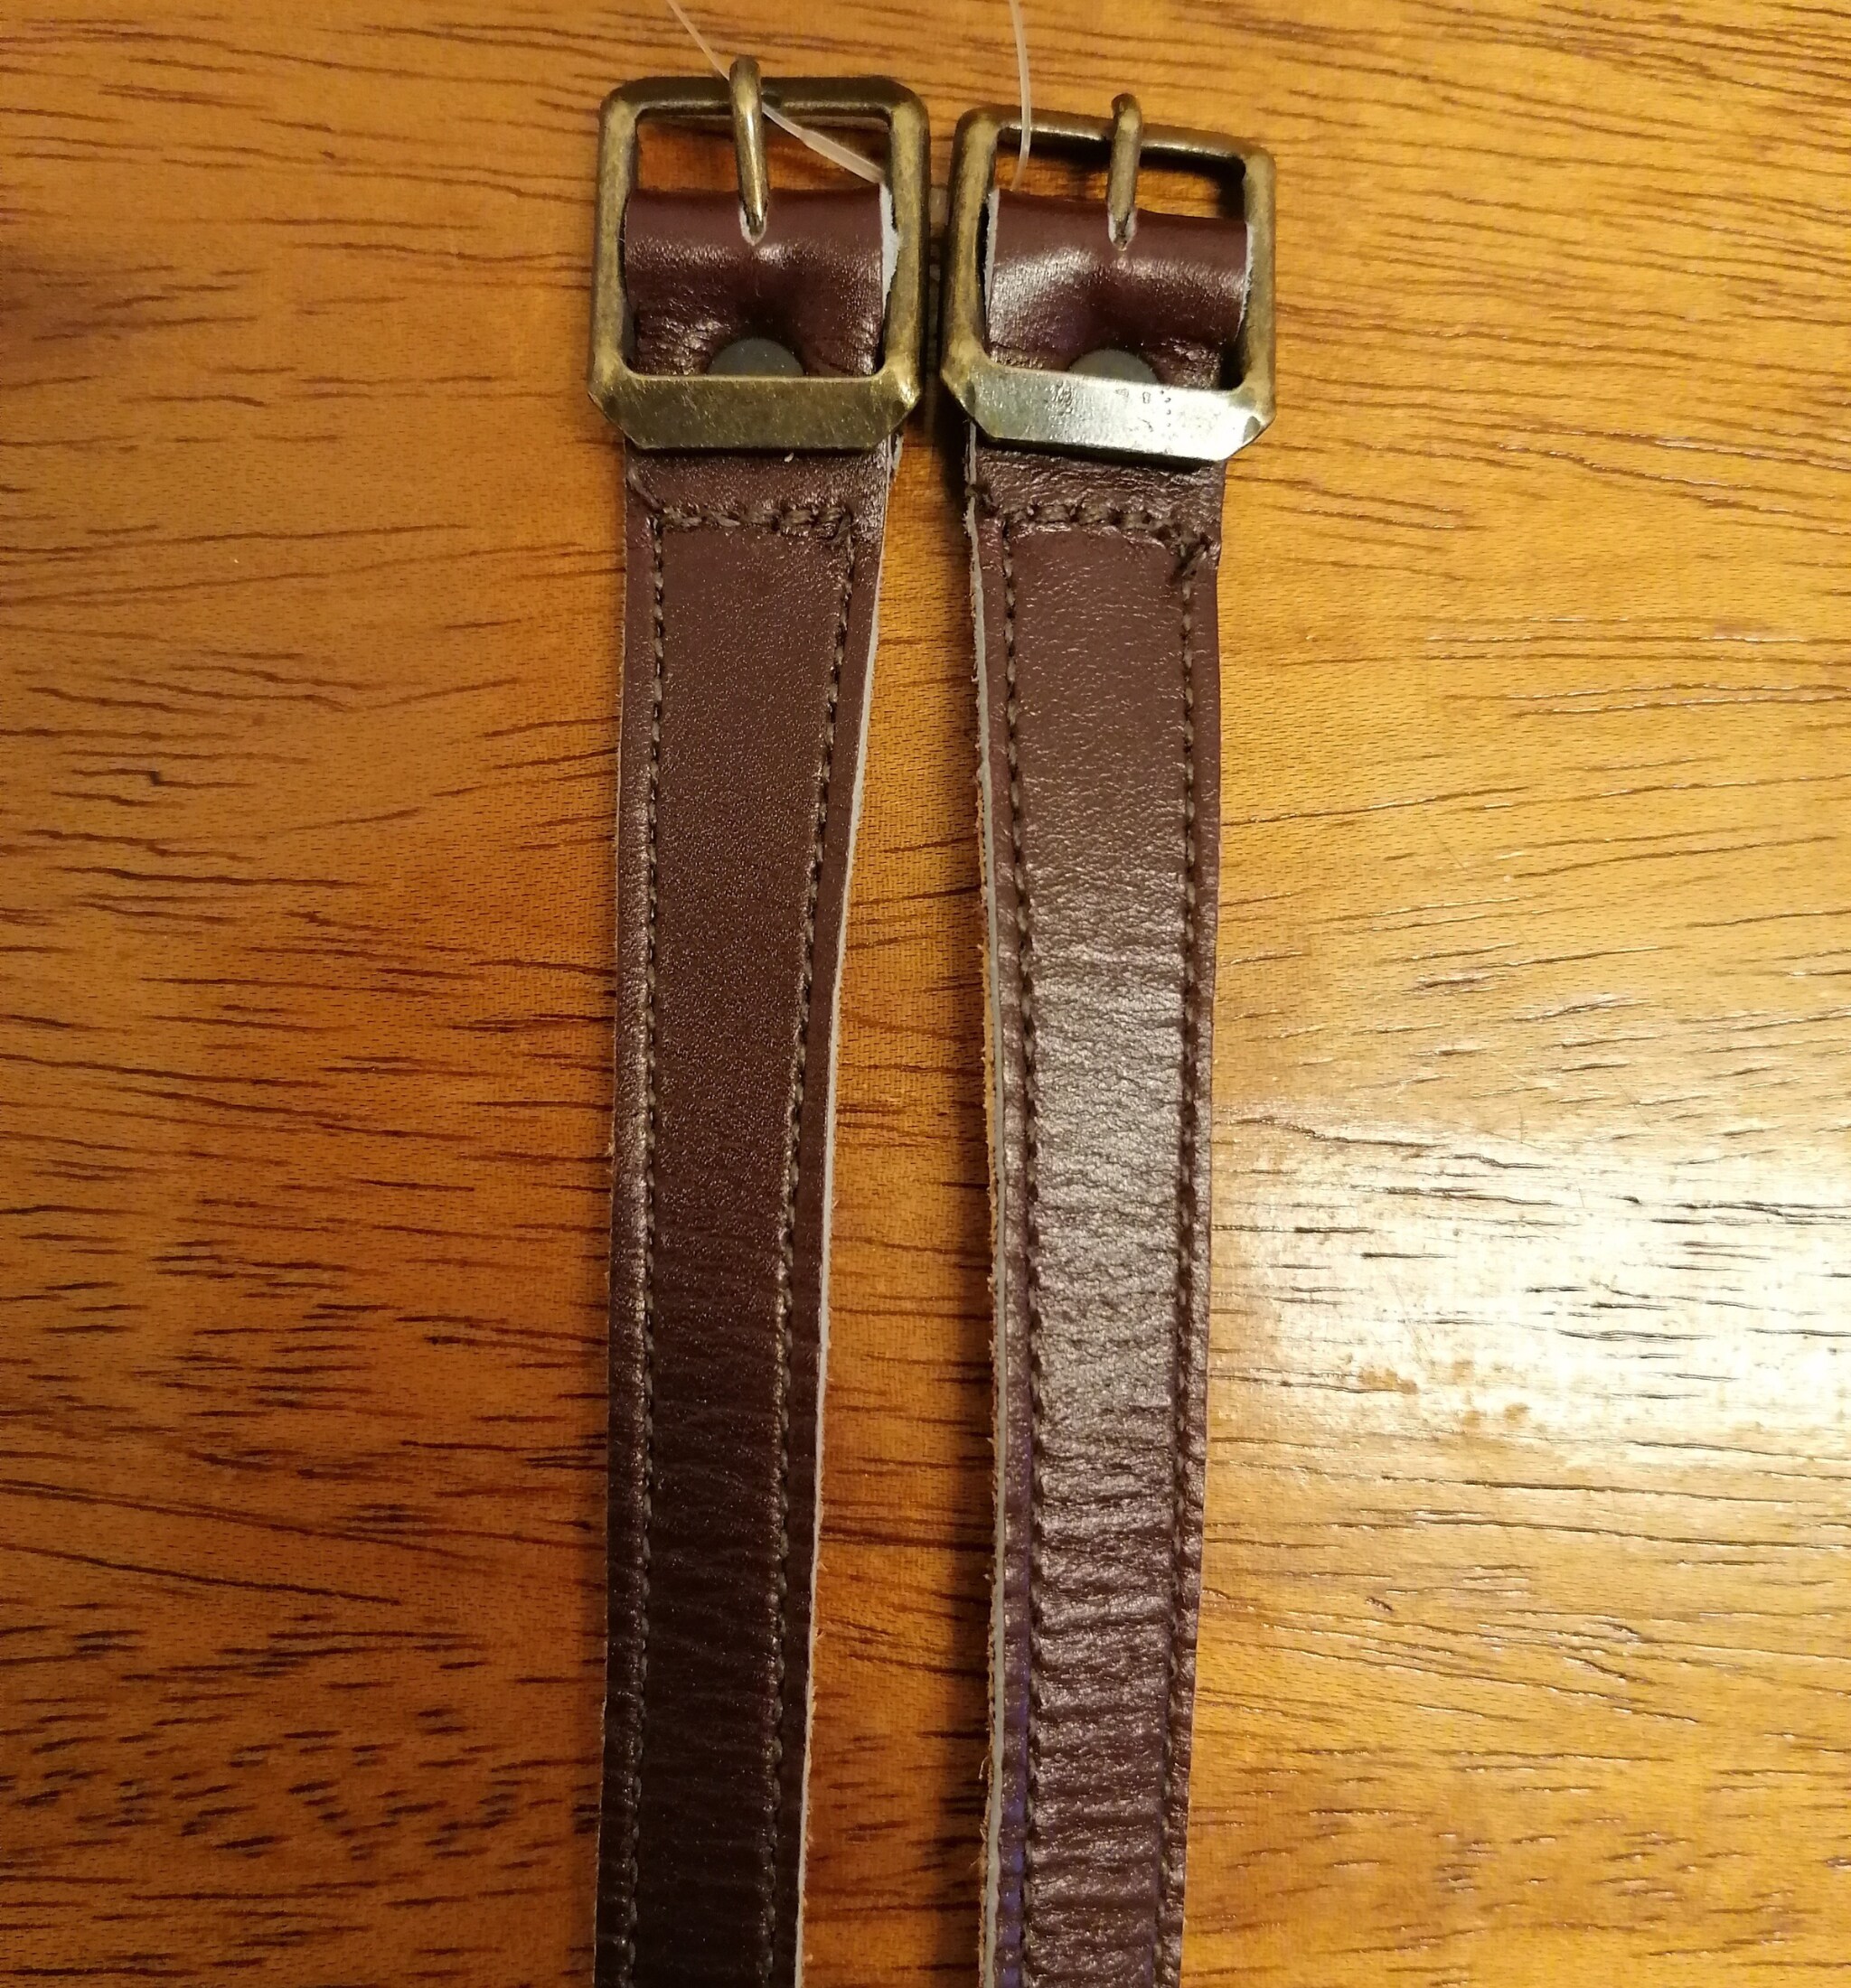 Spurstraps with brass buckles